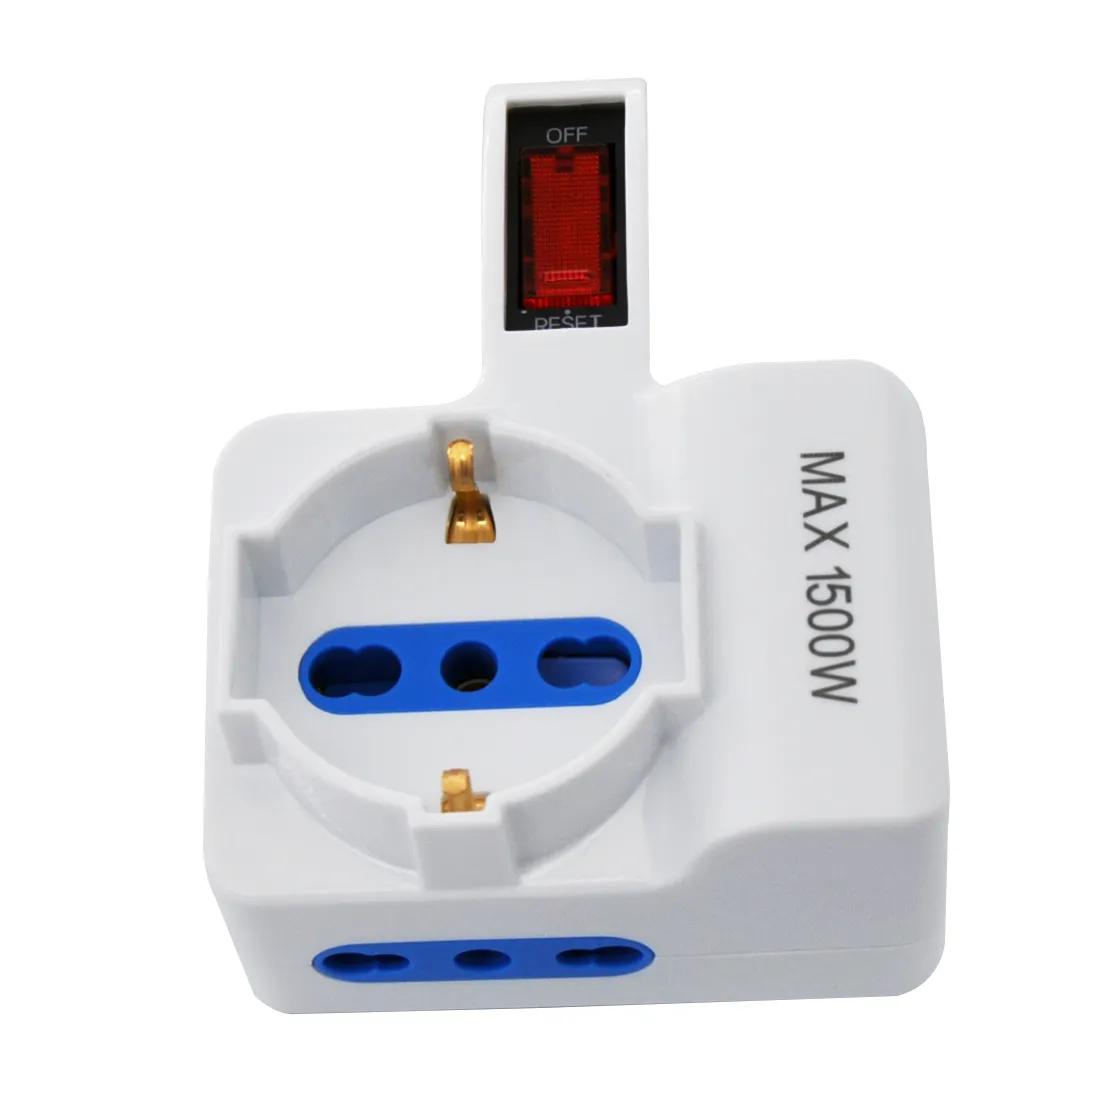 Multi adapter SAFELINE plug 10A 1 presa 10/16A bipasso+1 bipasso/Schuko with overload protection switch with 2 USB A+1 type C PD3.0